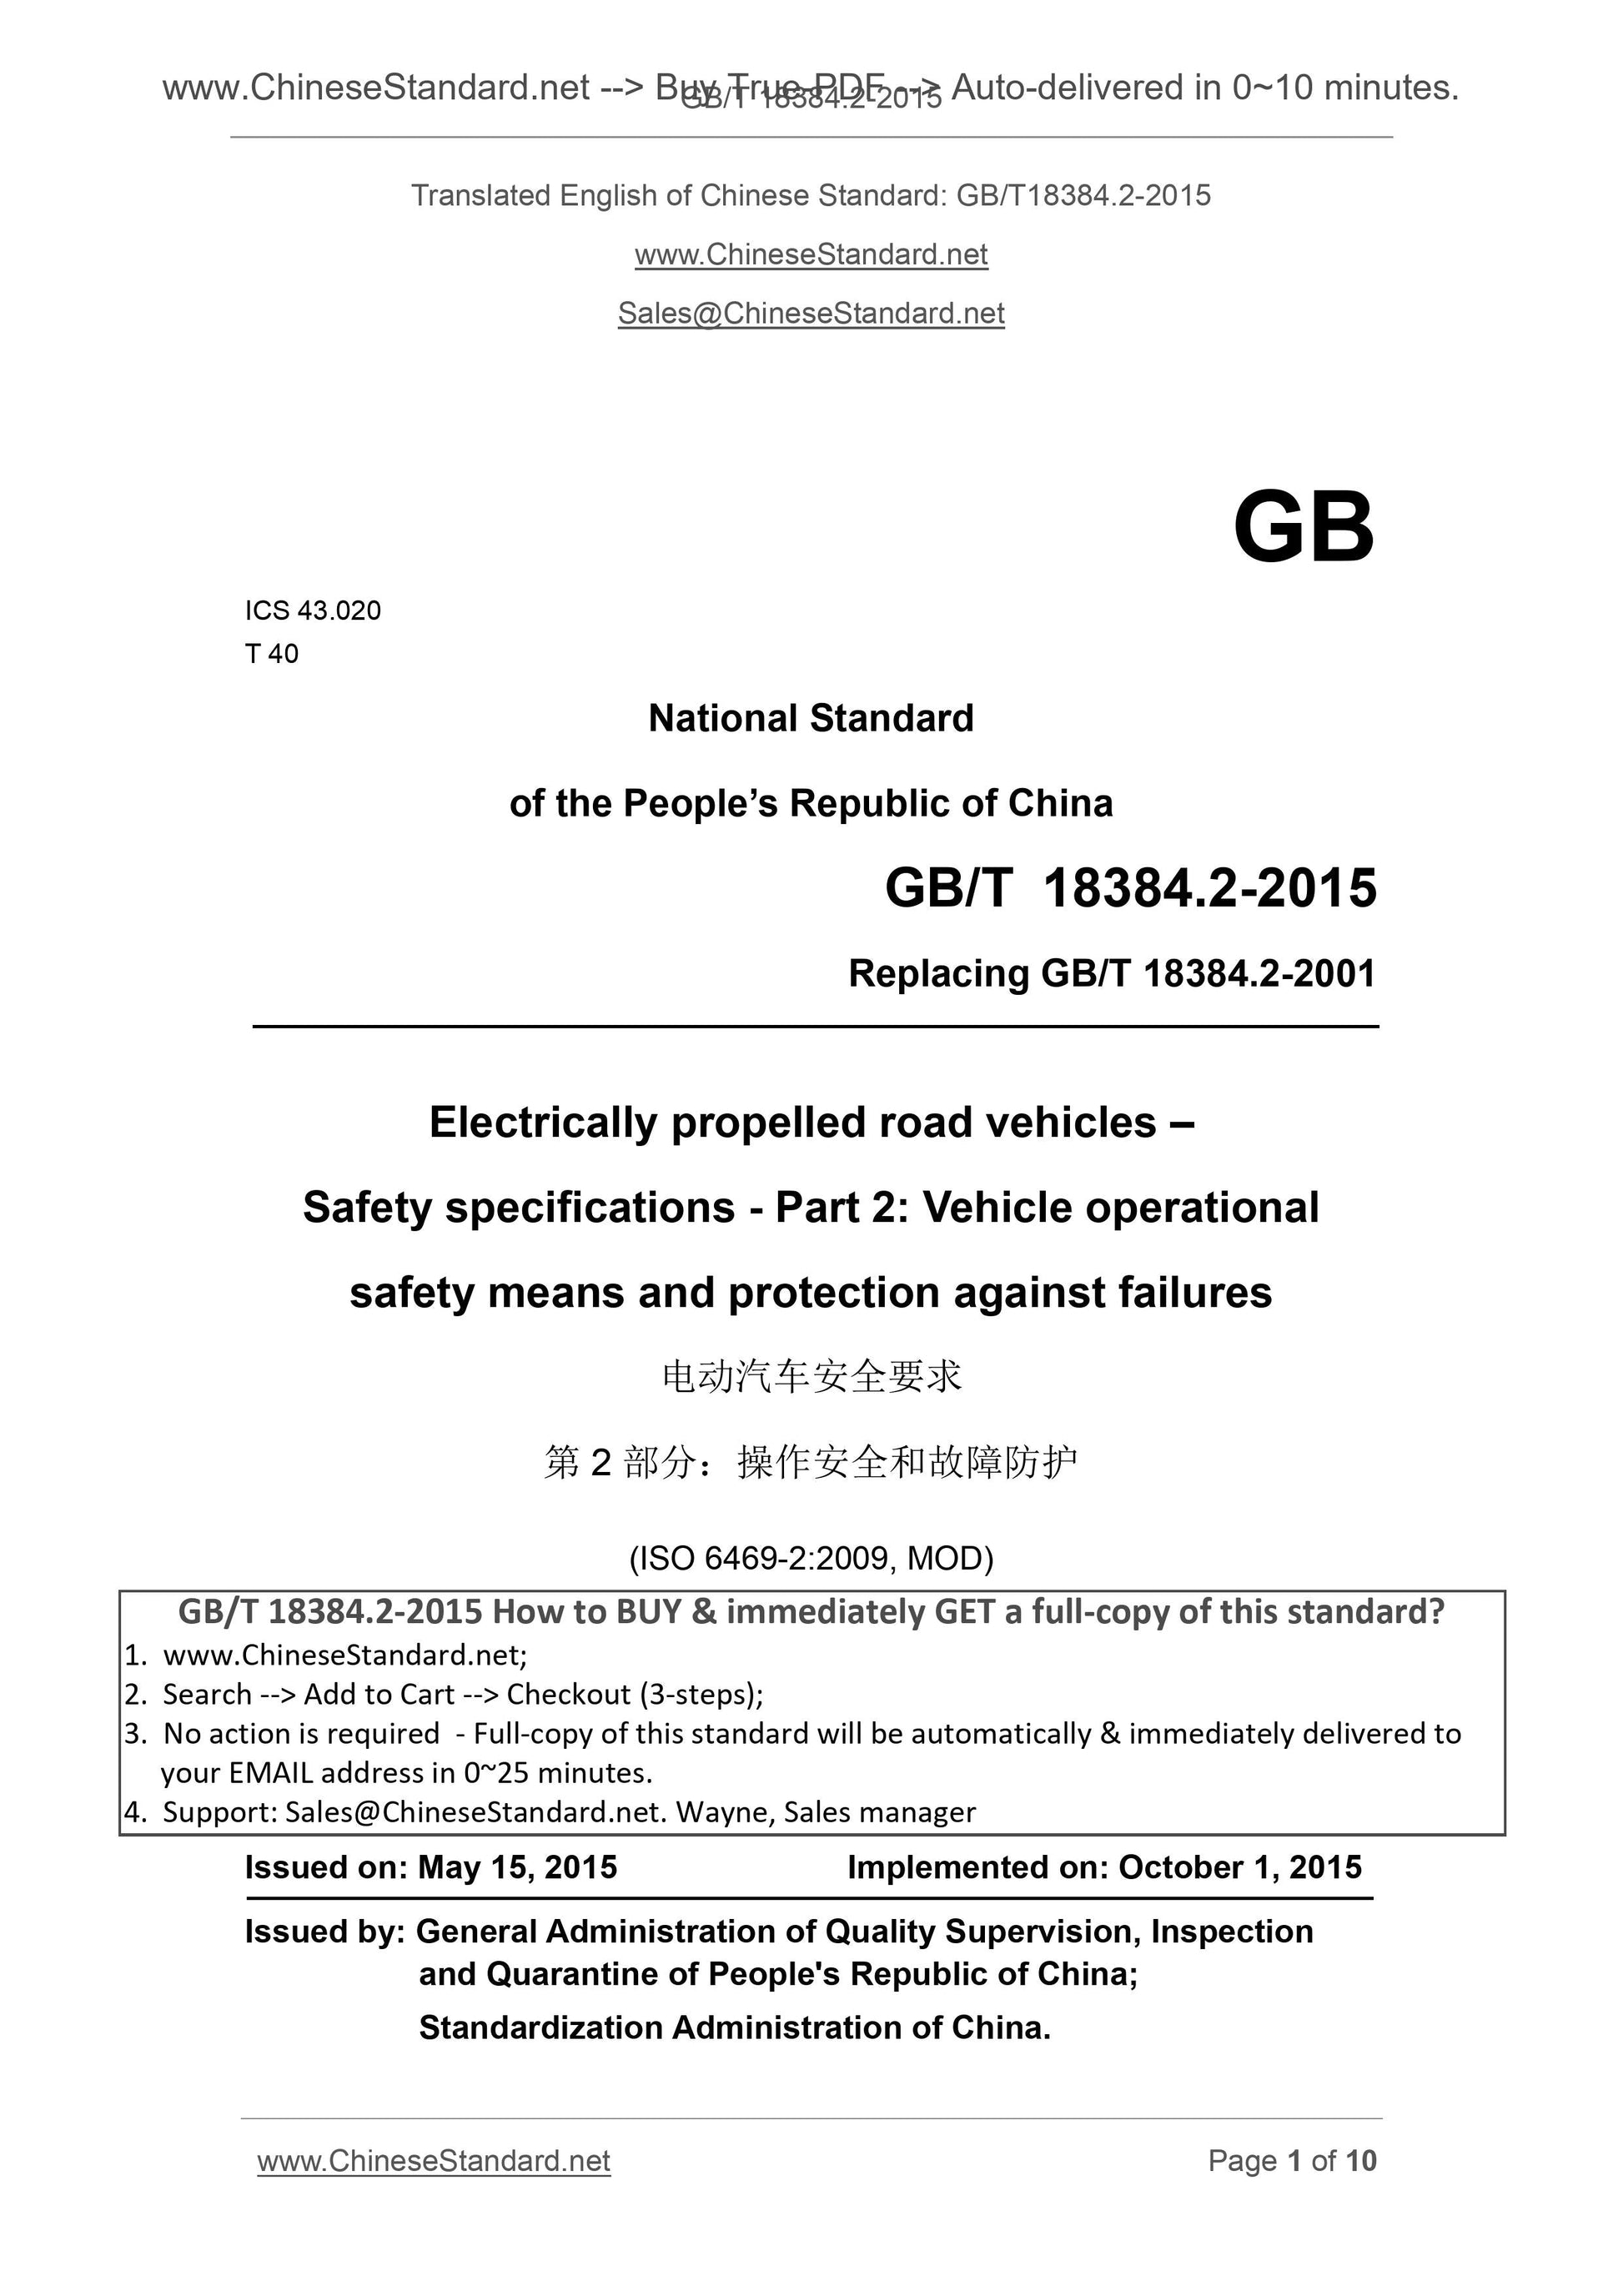 GB/T 18384.2-2015 Page 1